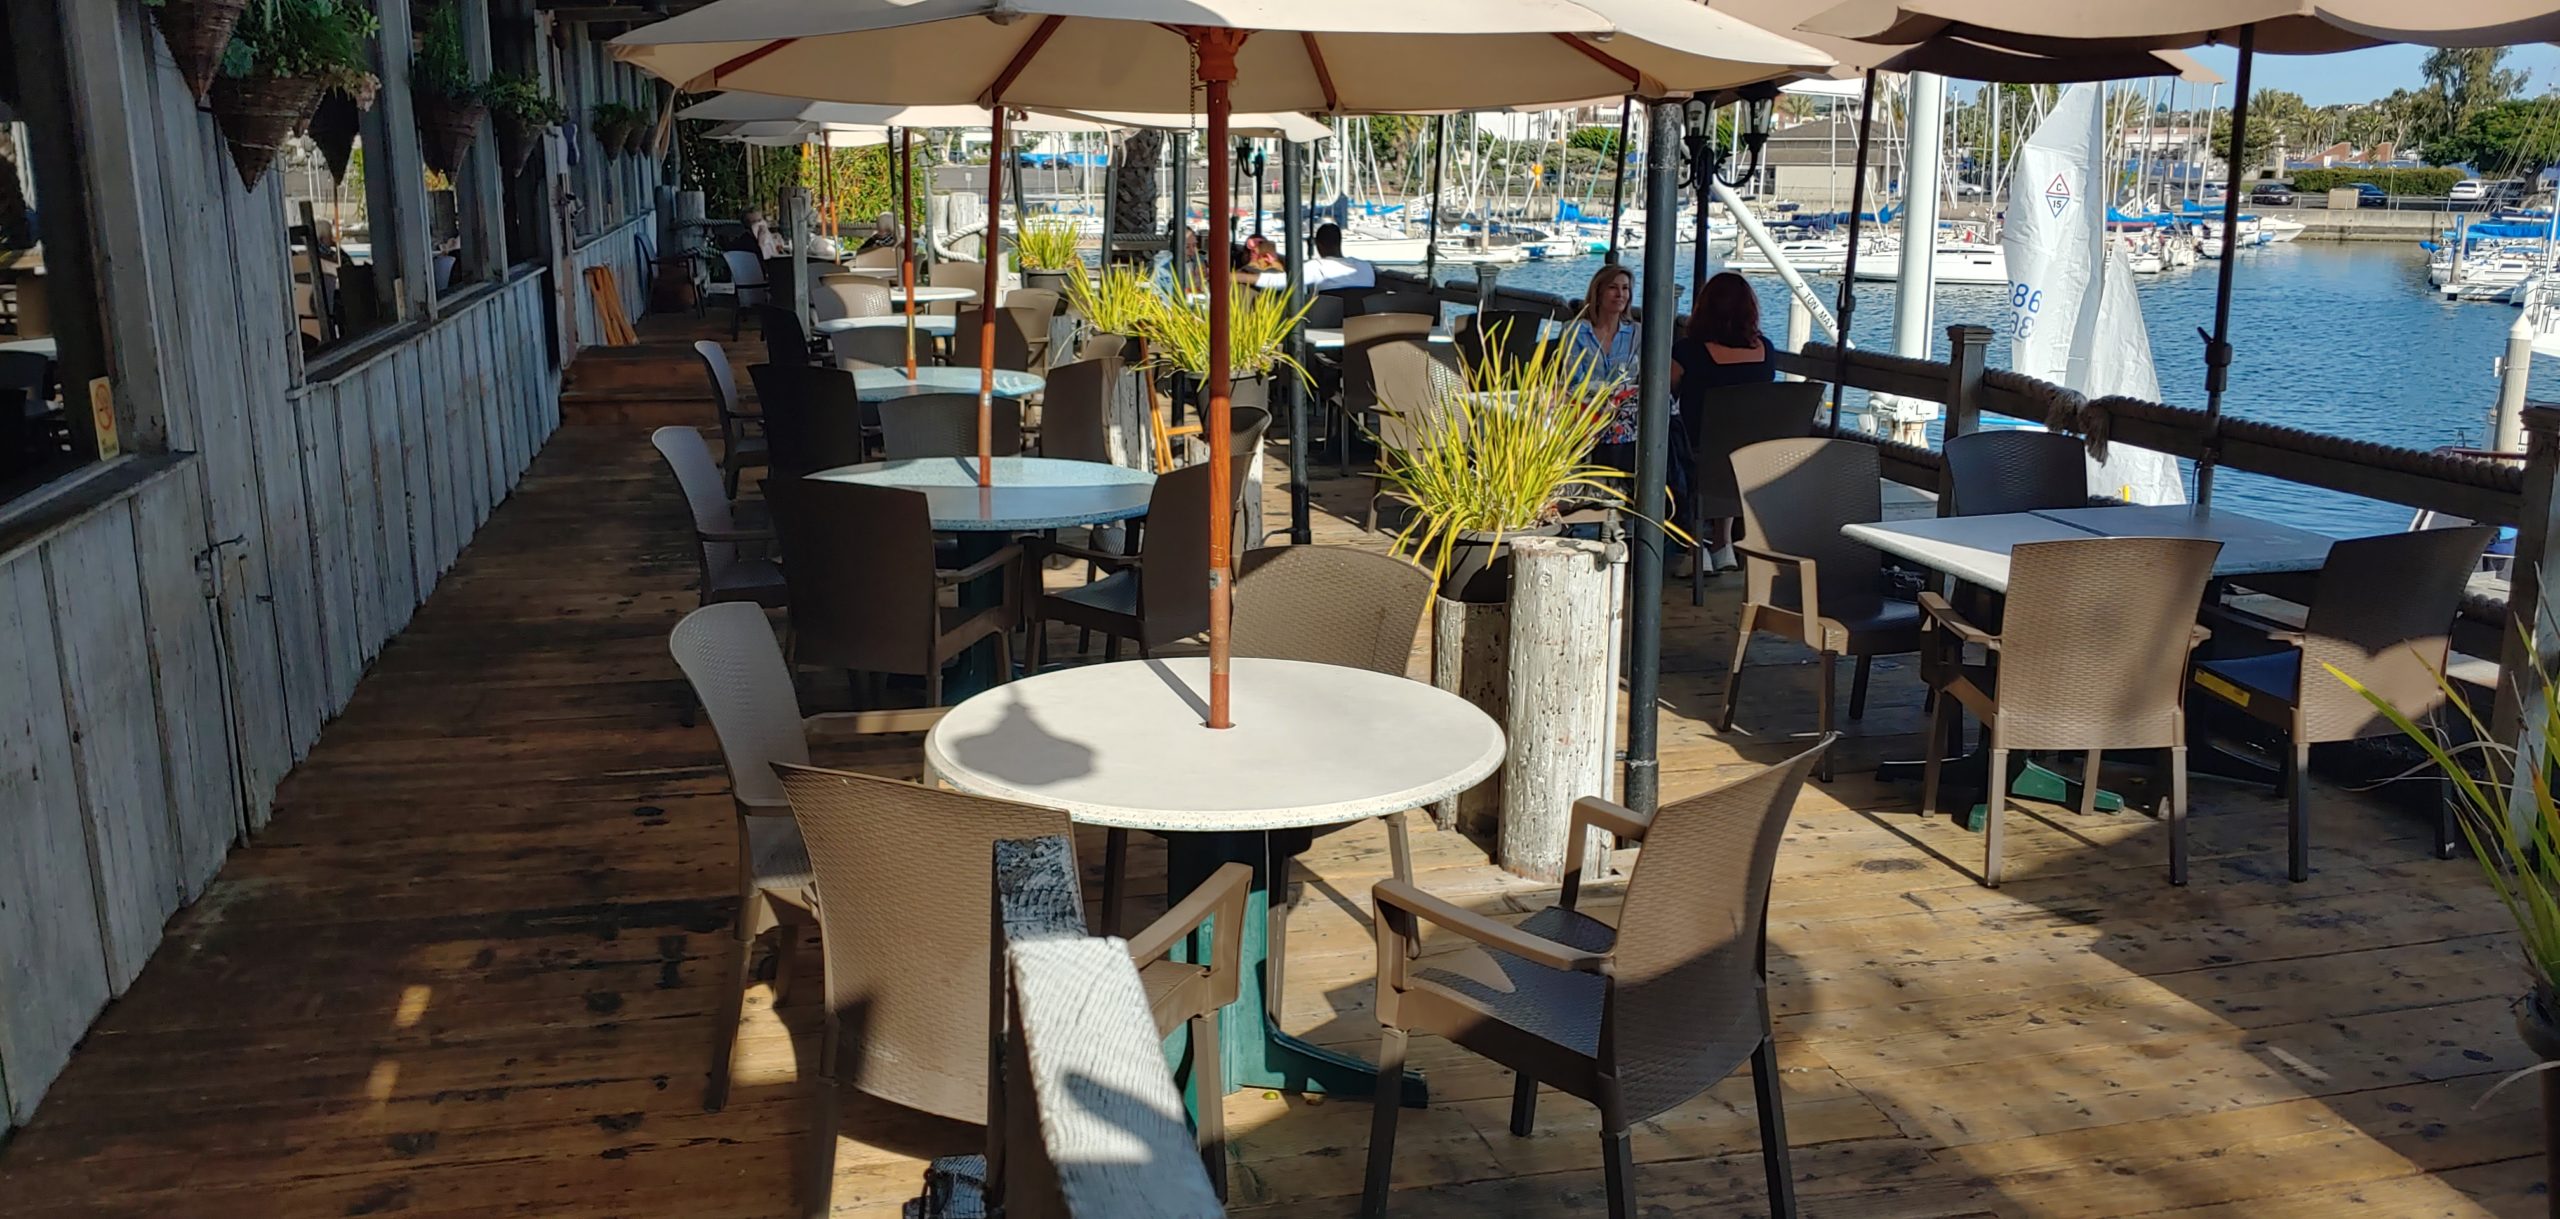 outdoor patio at waterfront restaurant with tables and chairs